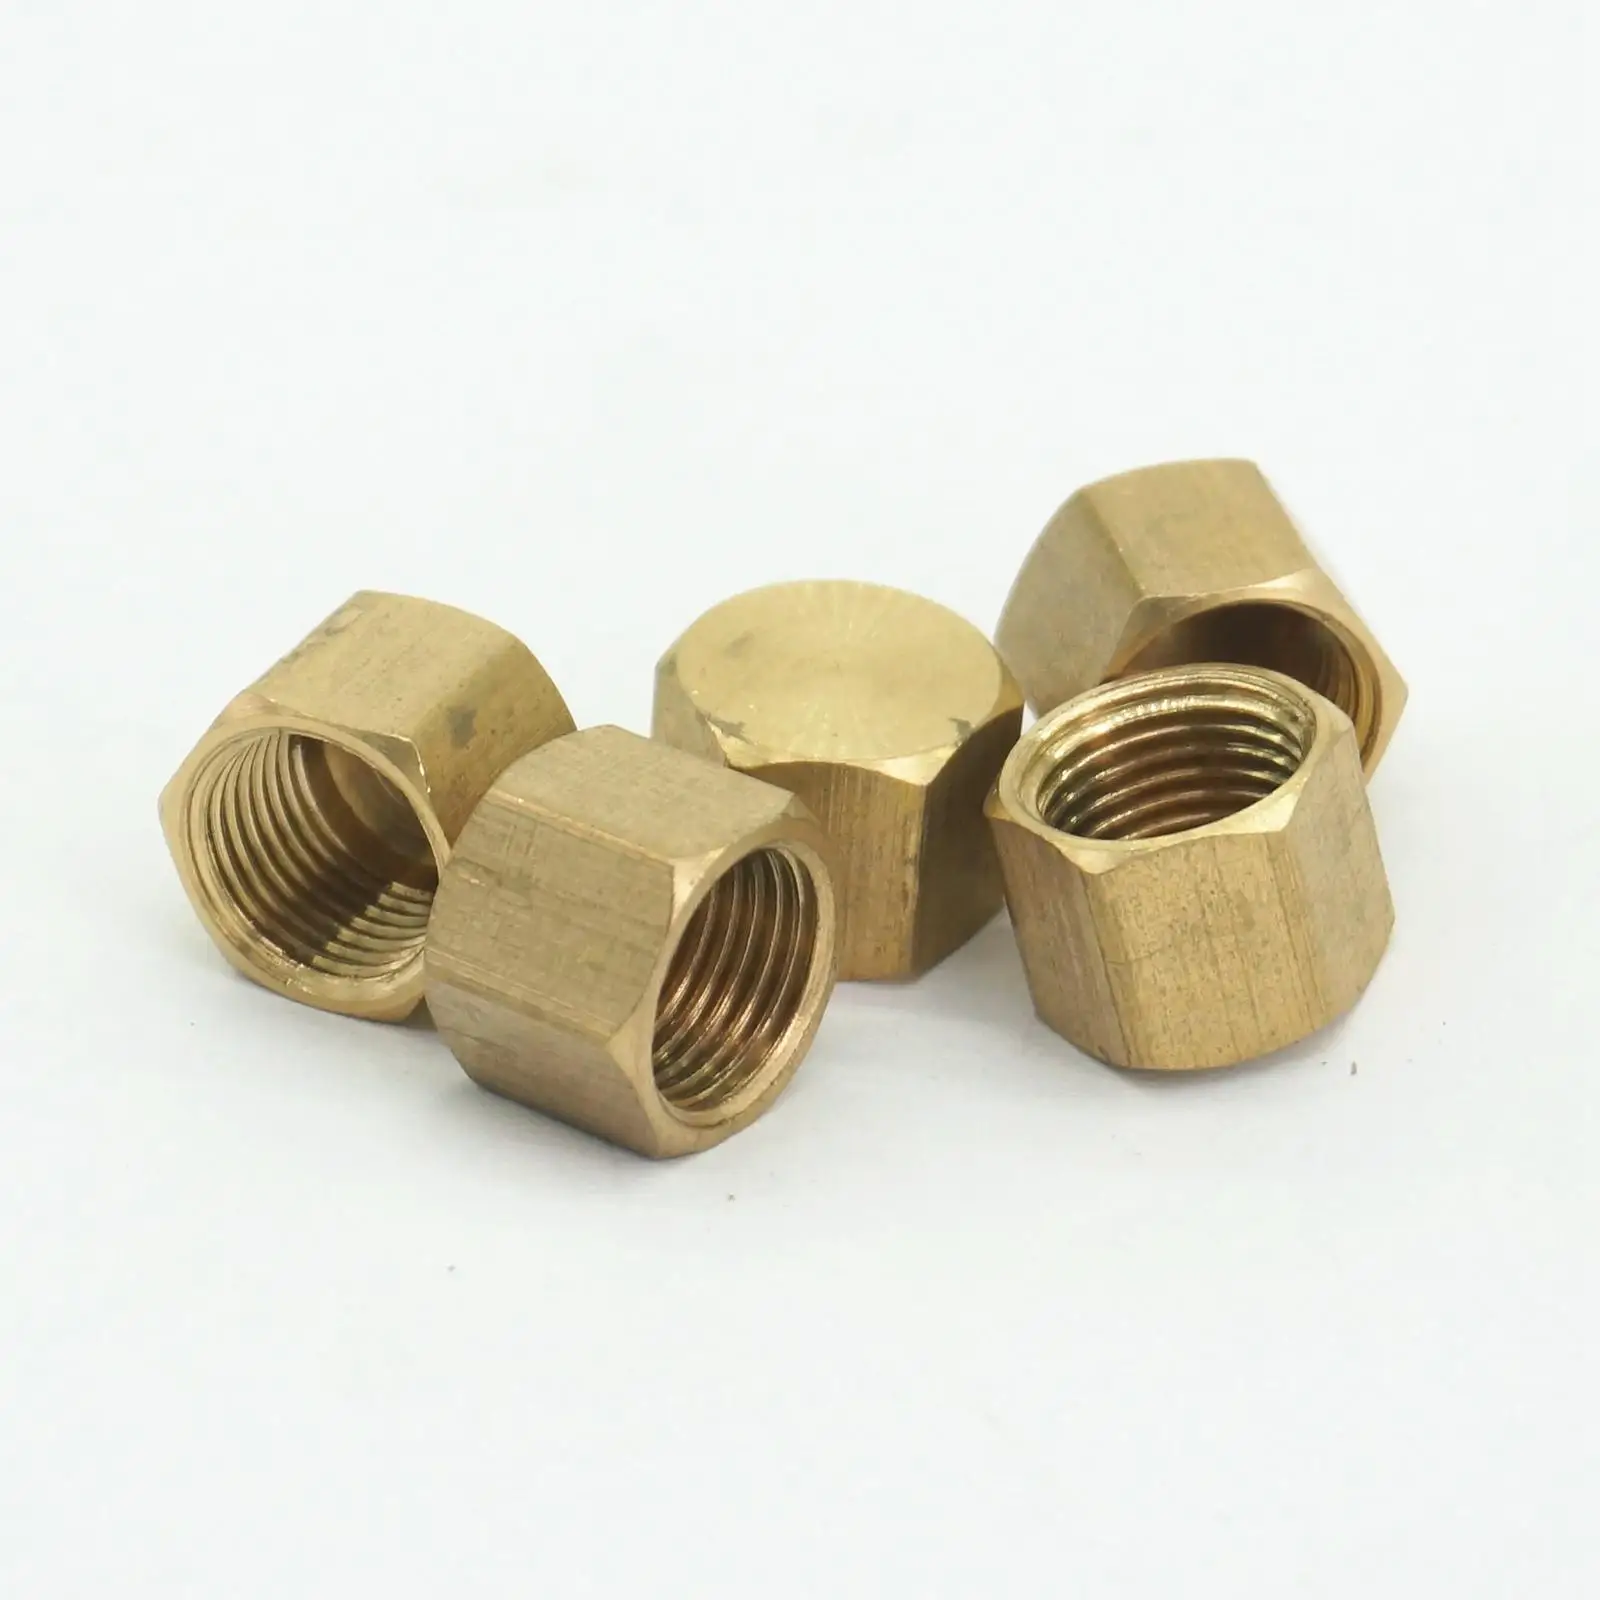 Details about   BSP Internal Hex Blanking Plug Blanking Cap Male Thread Plumbing Fitting 1/8"-1" 